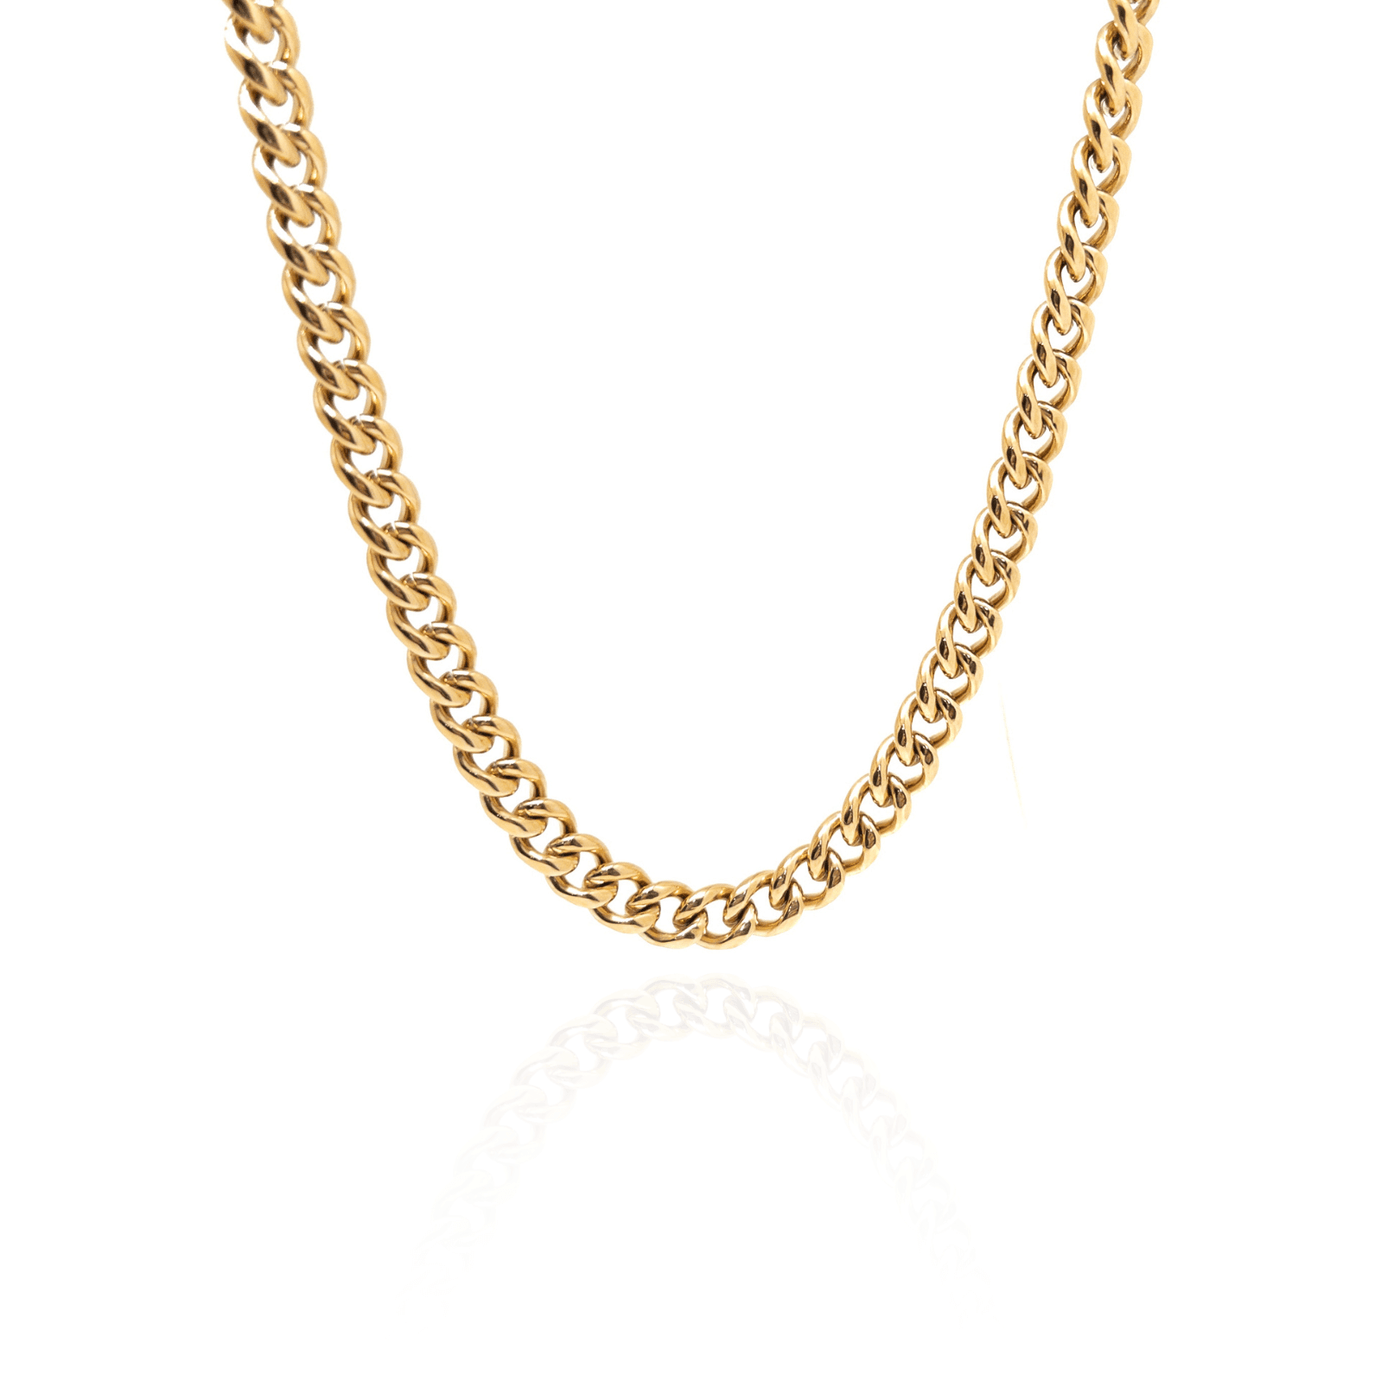 The Gold Plated Cuban Chain